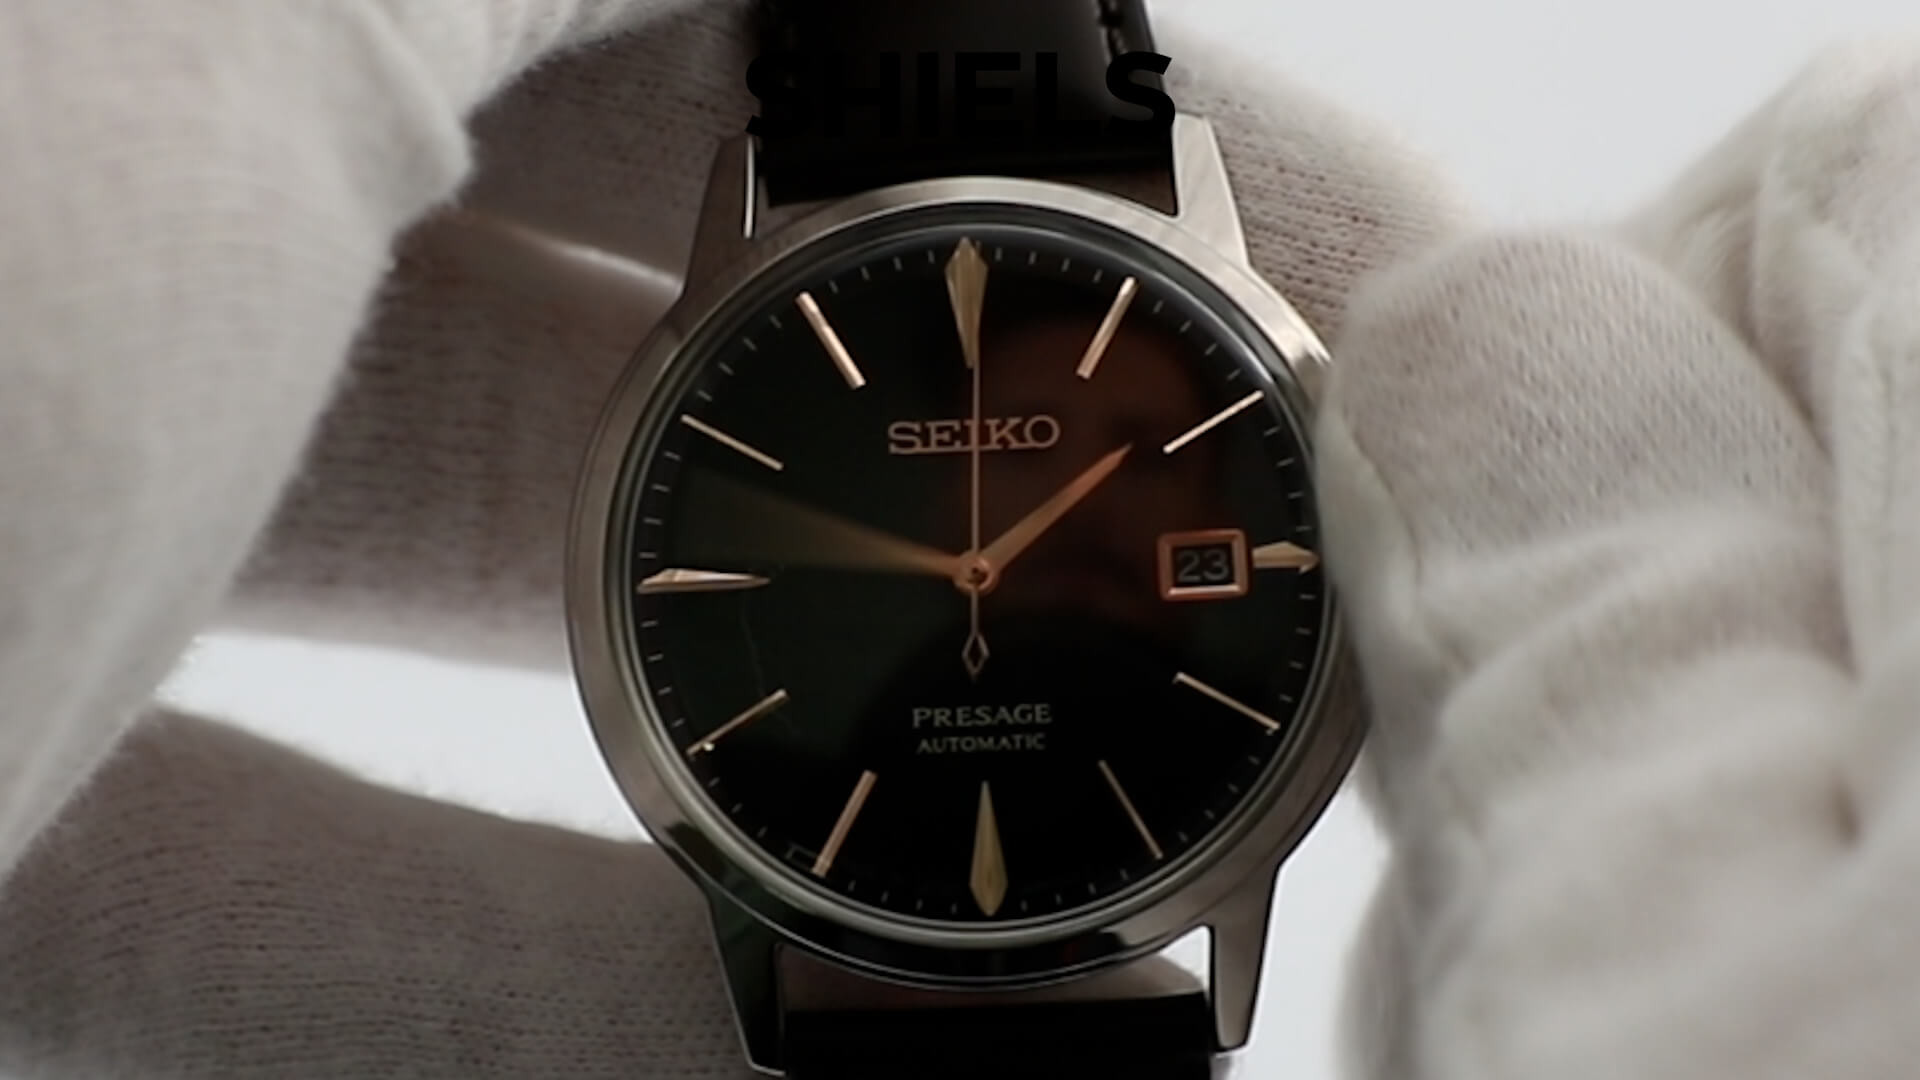 Setting the time on a Seiko Presage watch